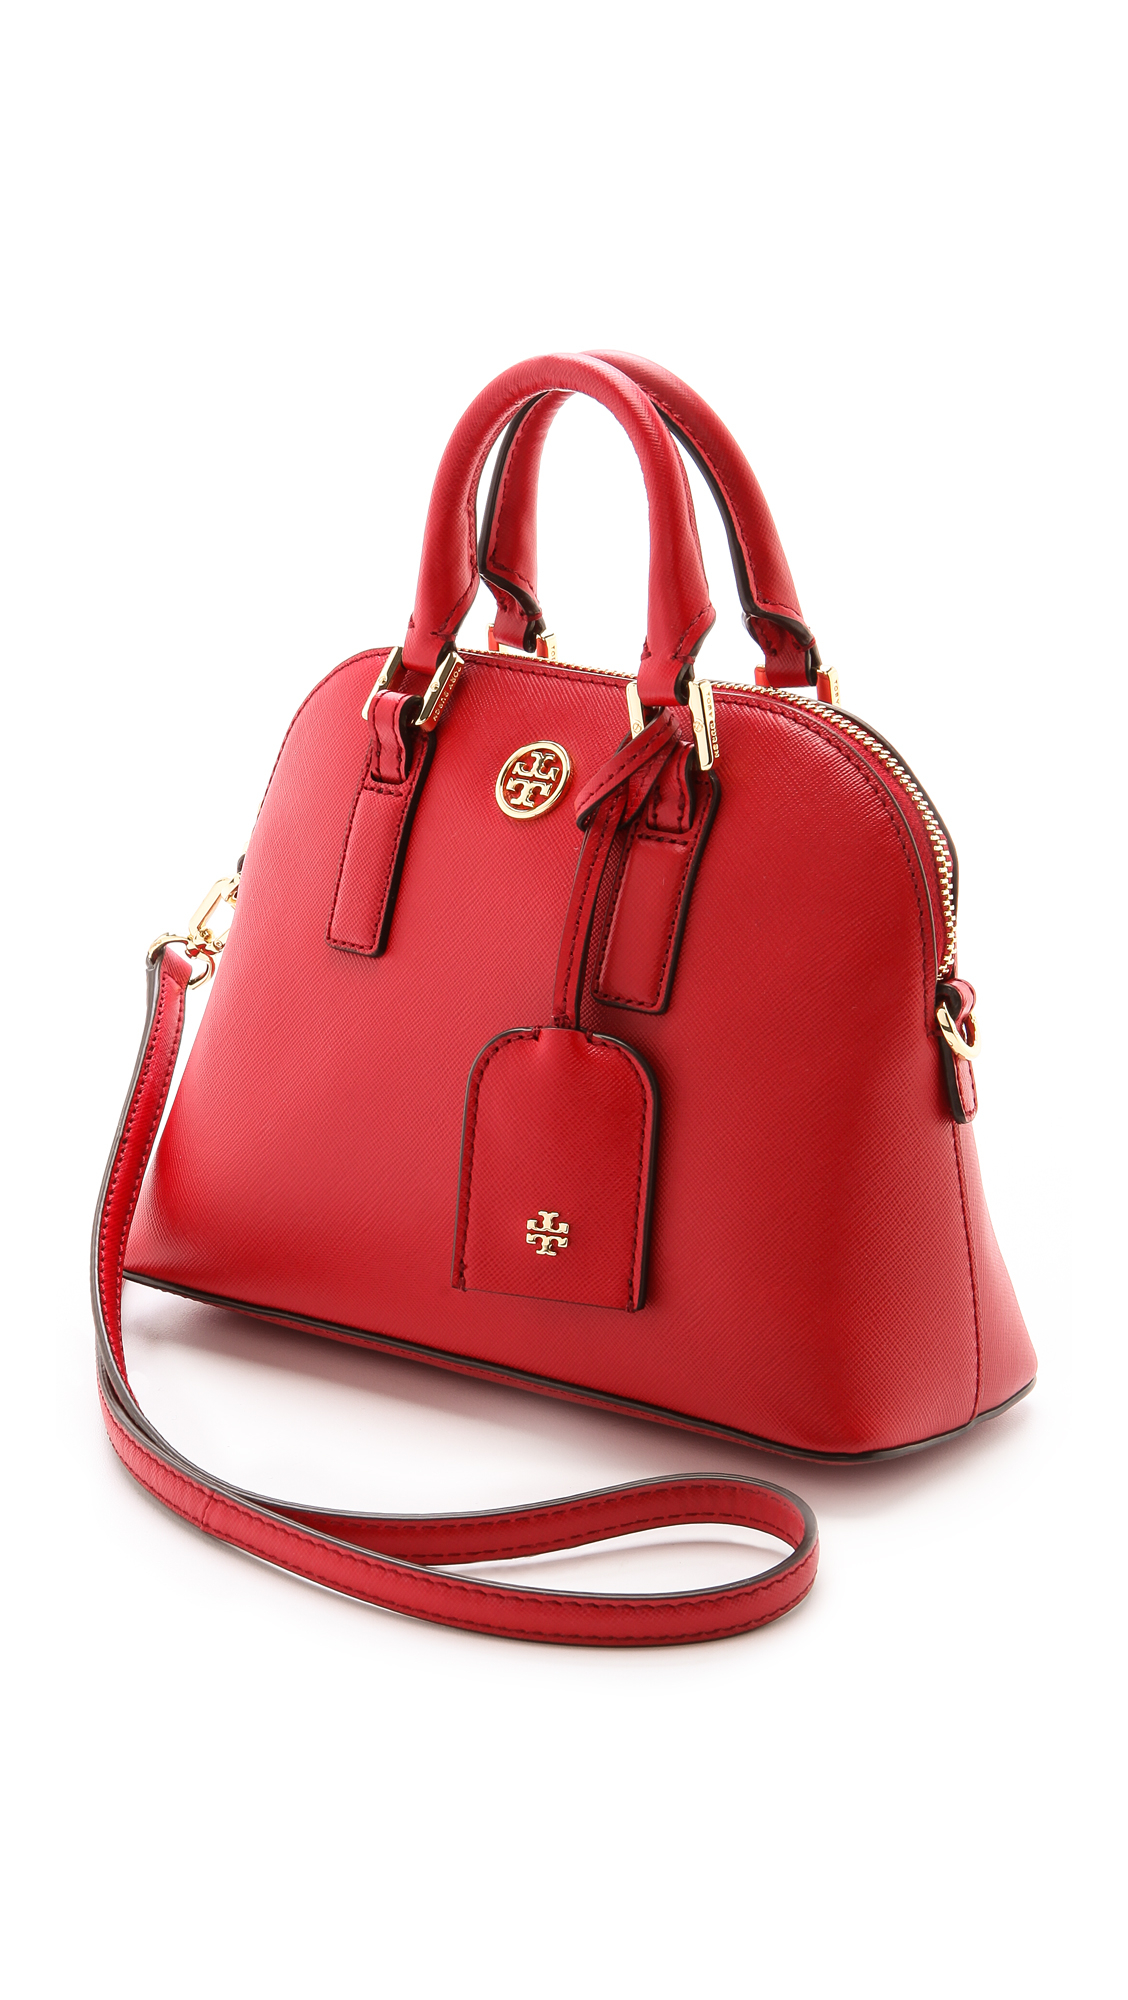 Tory Burch Robinson Mini Dome Satchel - Jelly Blue in Red - Lyst